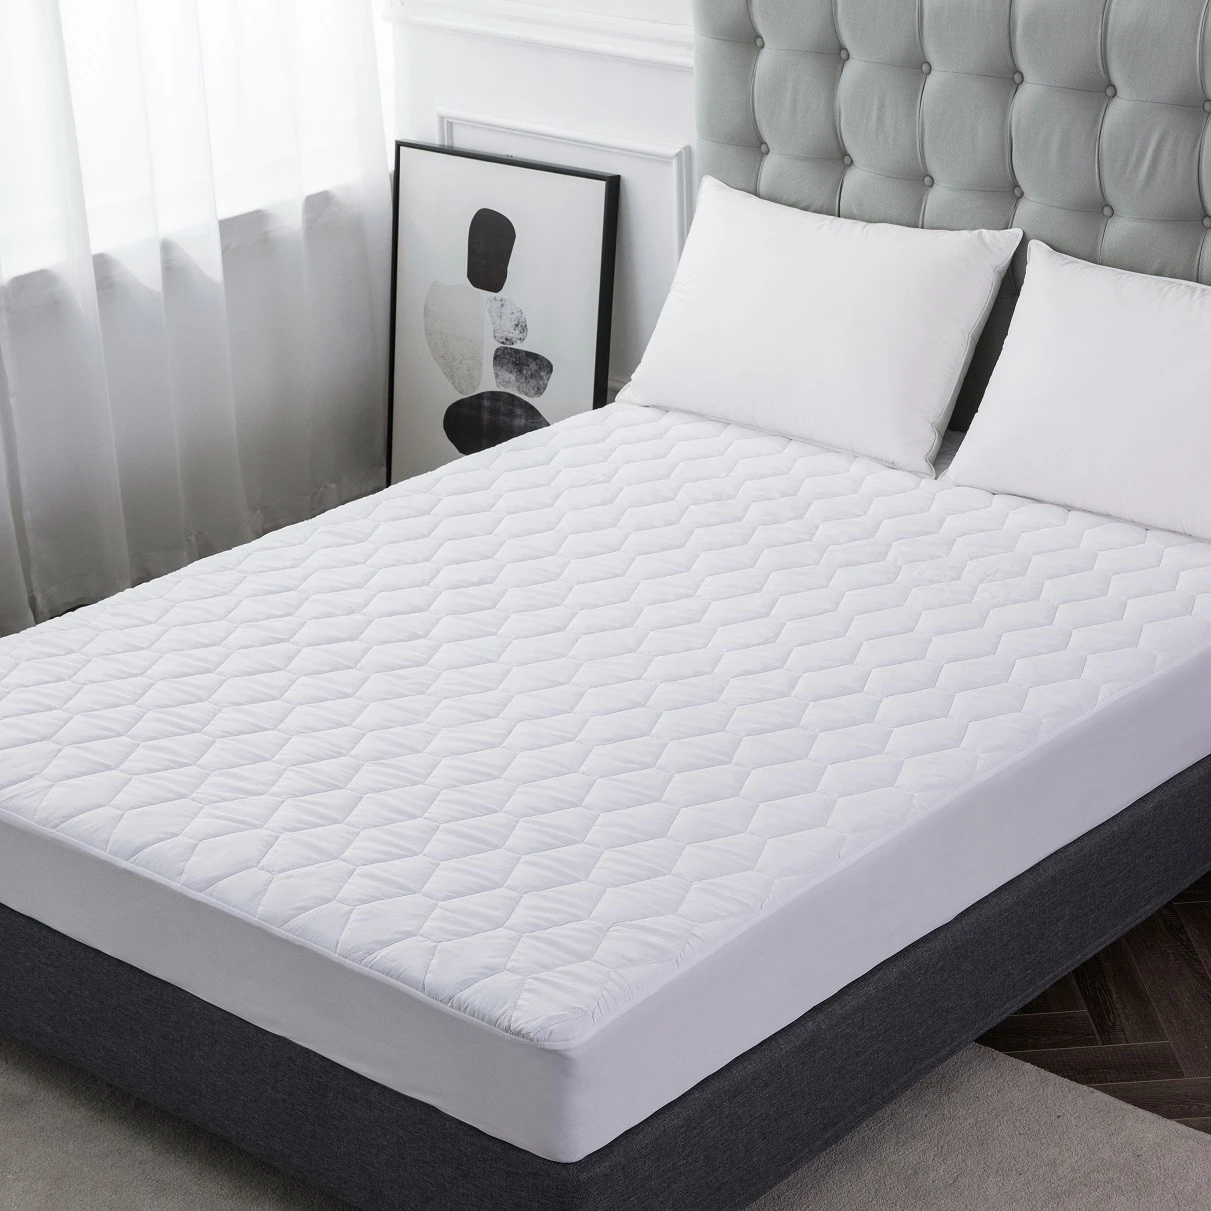 Quilted Fitted Mattress Pad (Queen) Mattress Cover Stretches up to 18 Inches Deep Mattress Topper